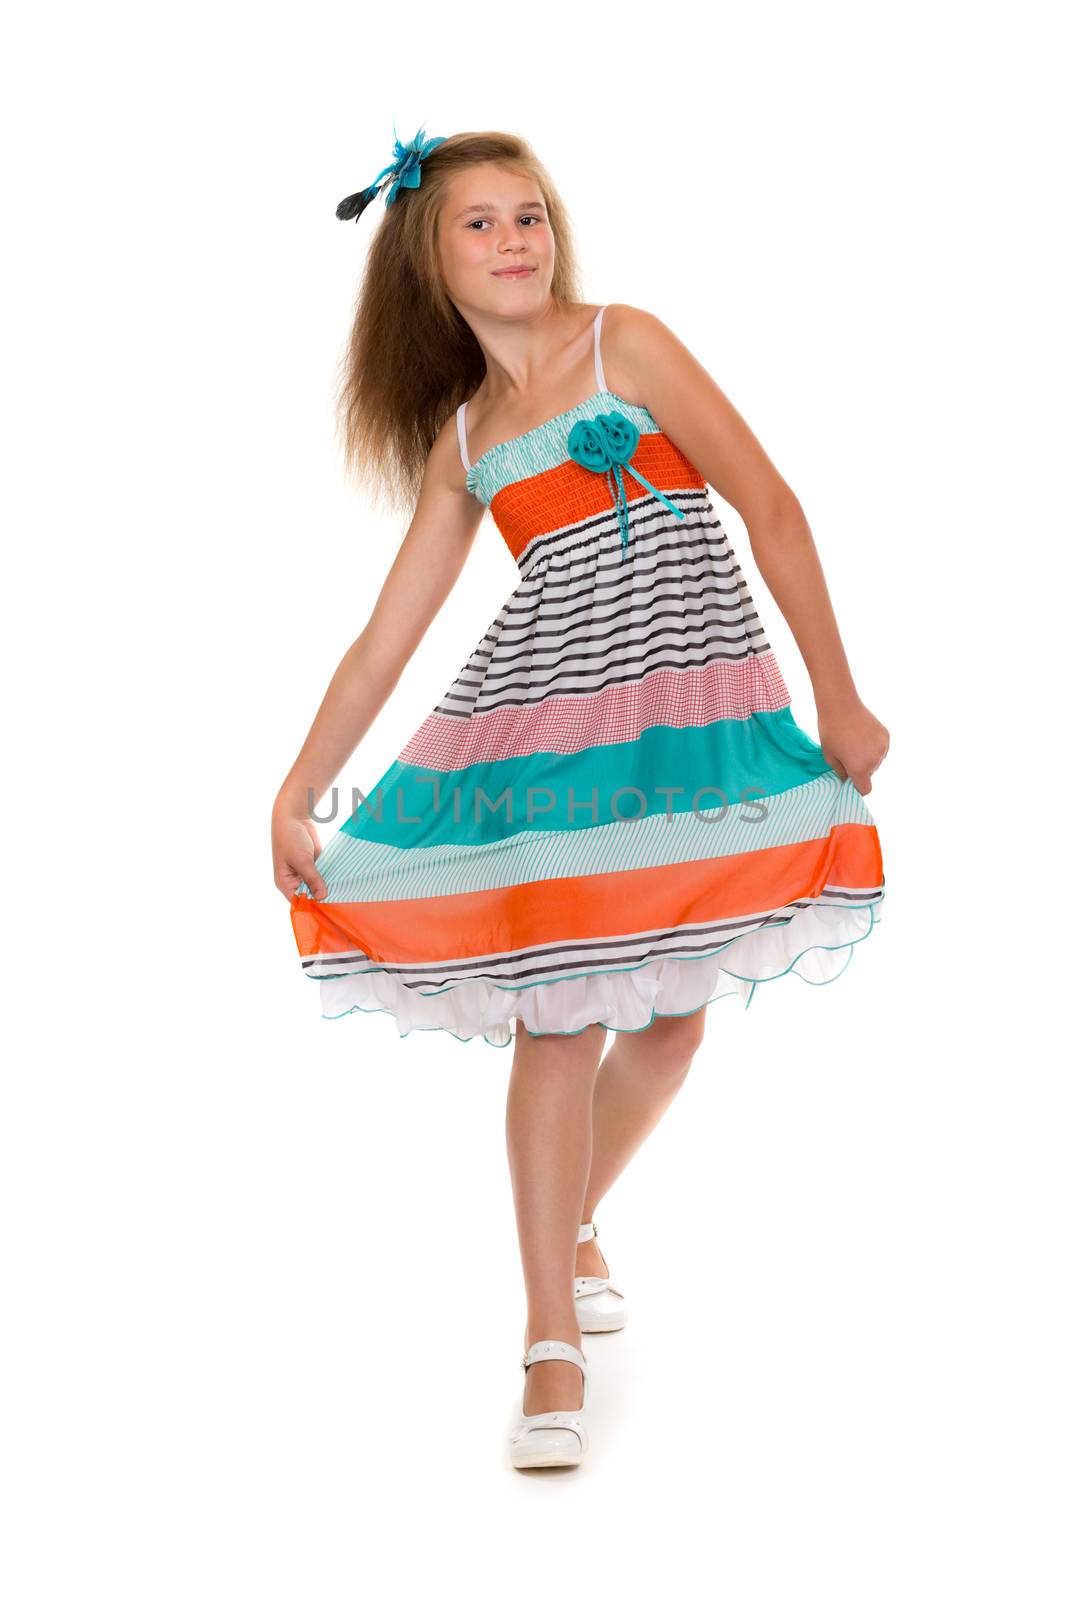 11 year old girl dances in colorful dress in the studio. Isolate on white.